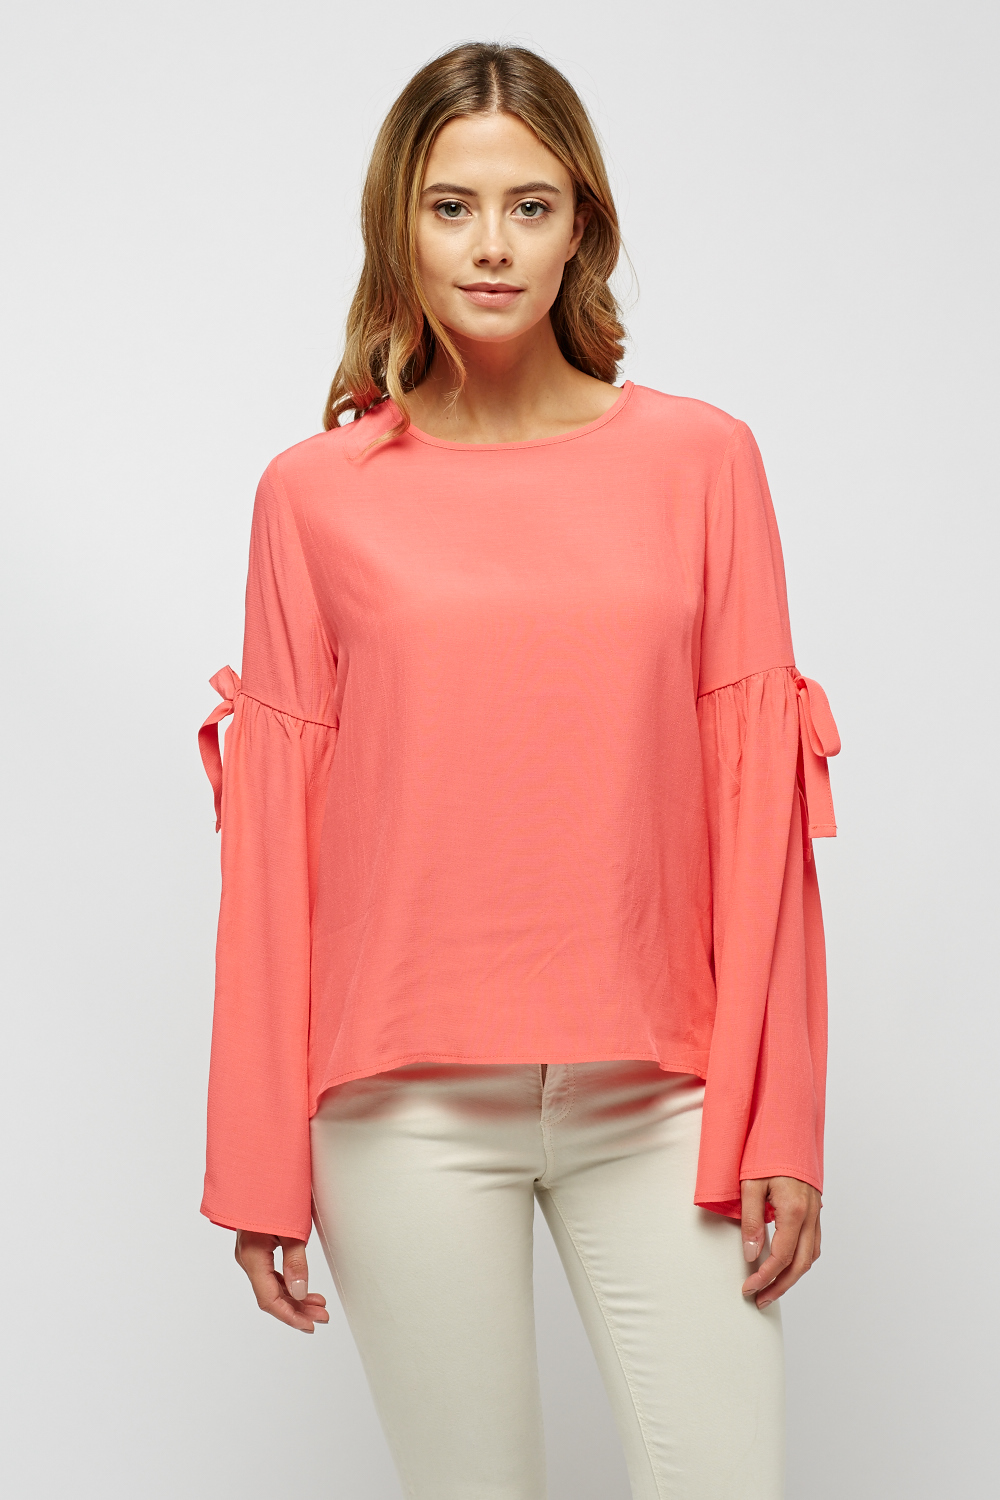 Flare Sleeve Neon Pink Top - Just $1